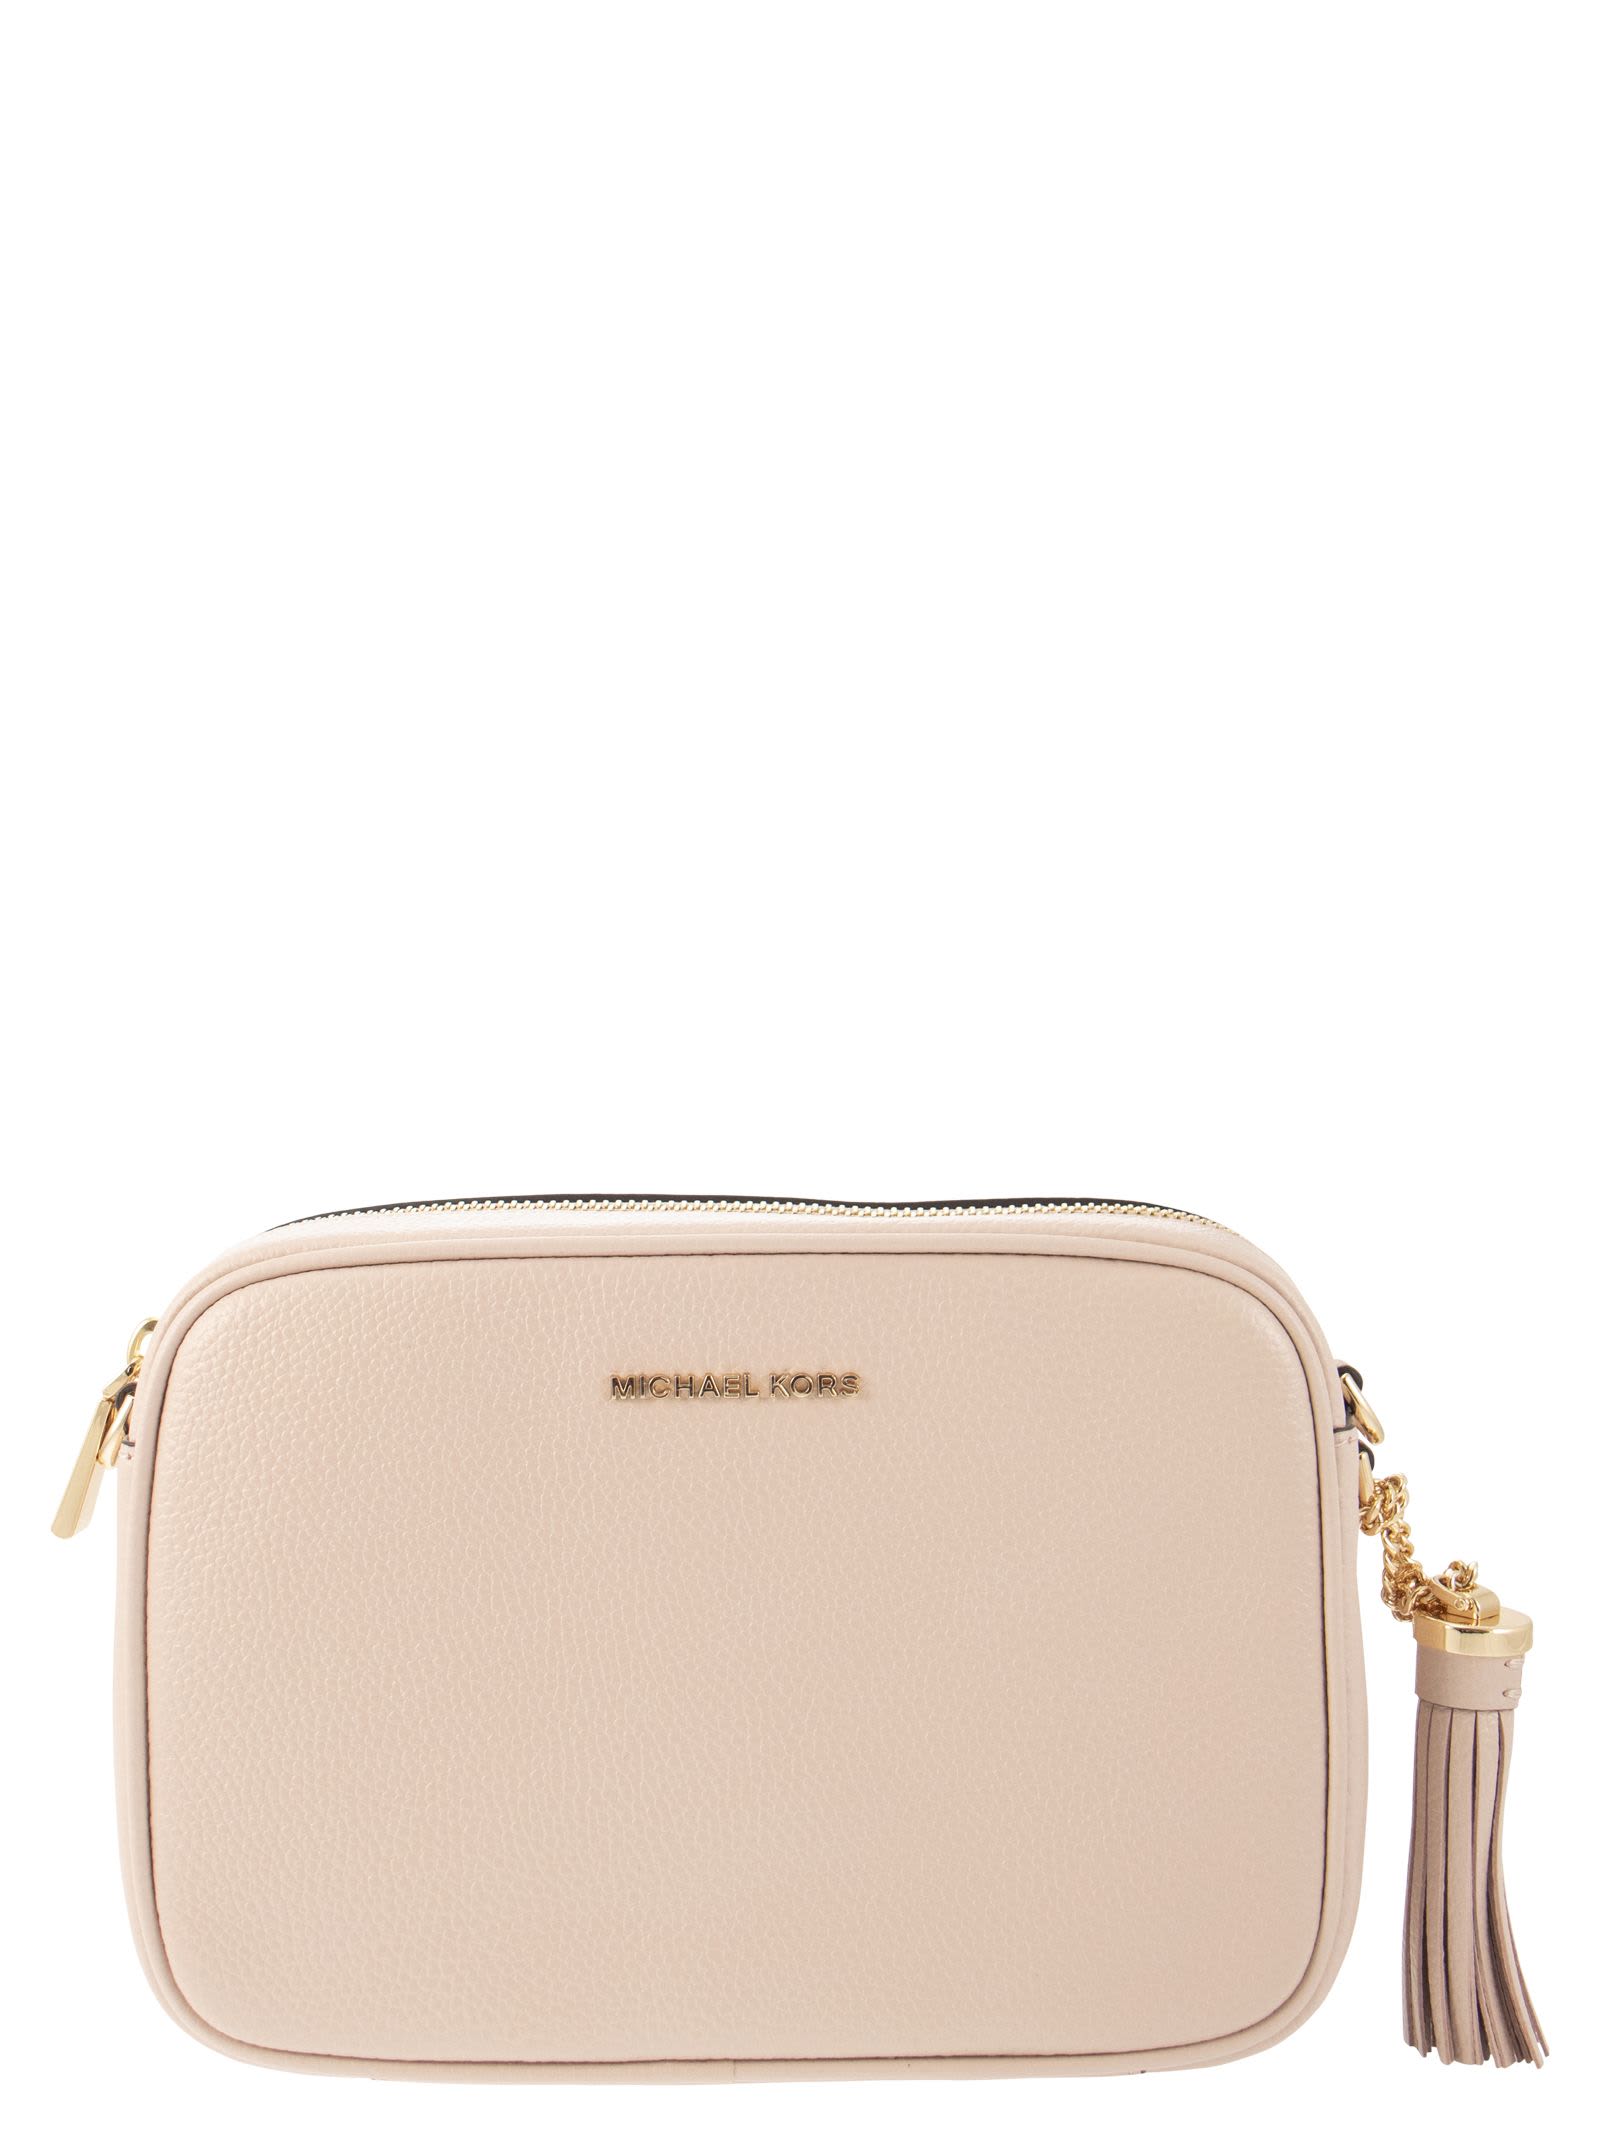 MICHAEL KORS GINNY - BORSA A TRACOLLA IN PELLE